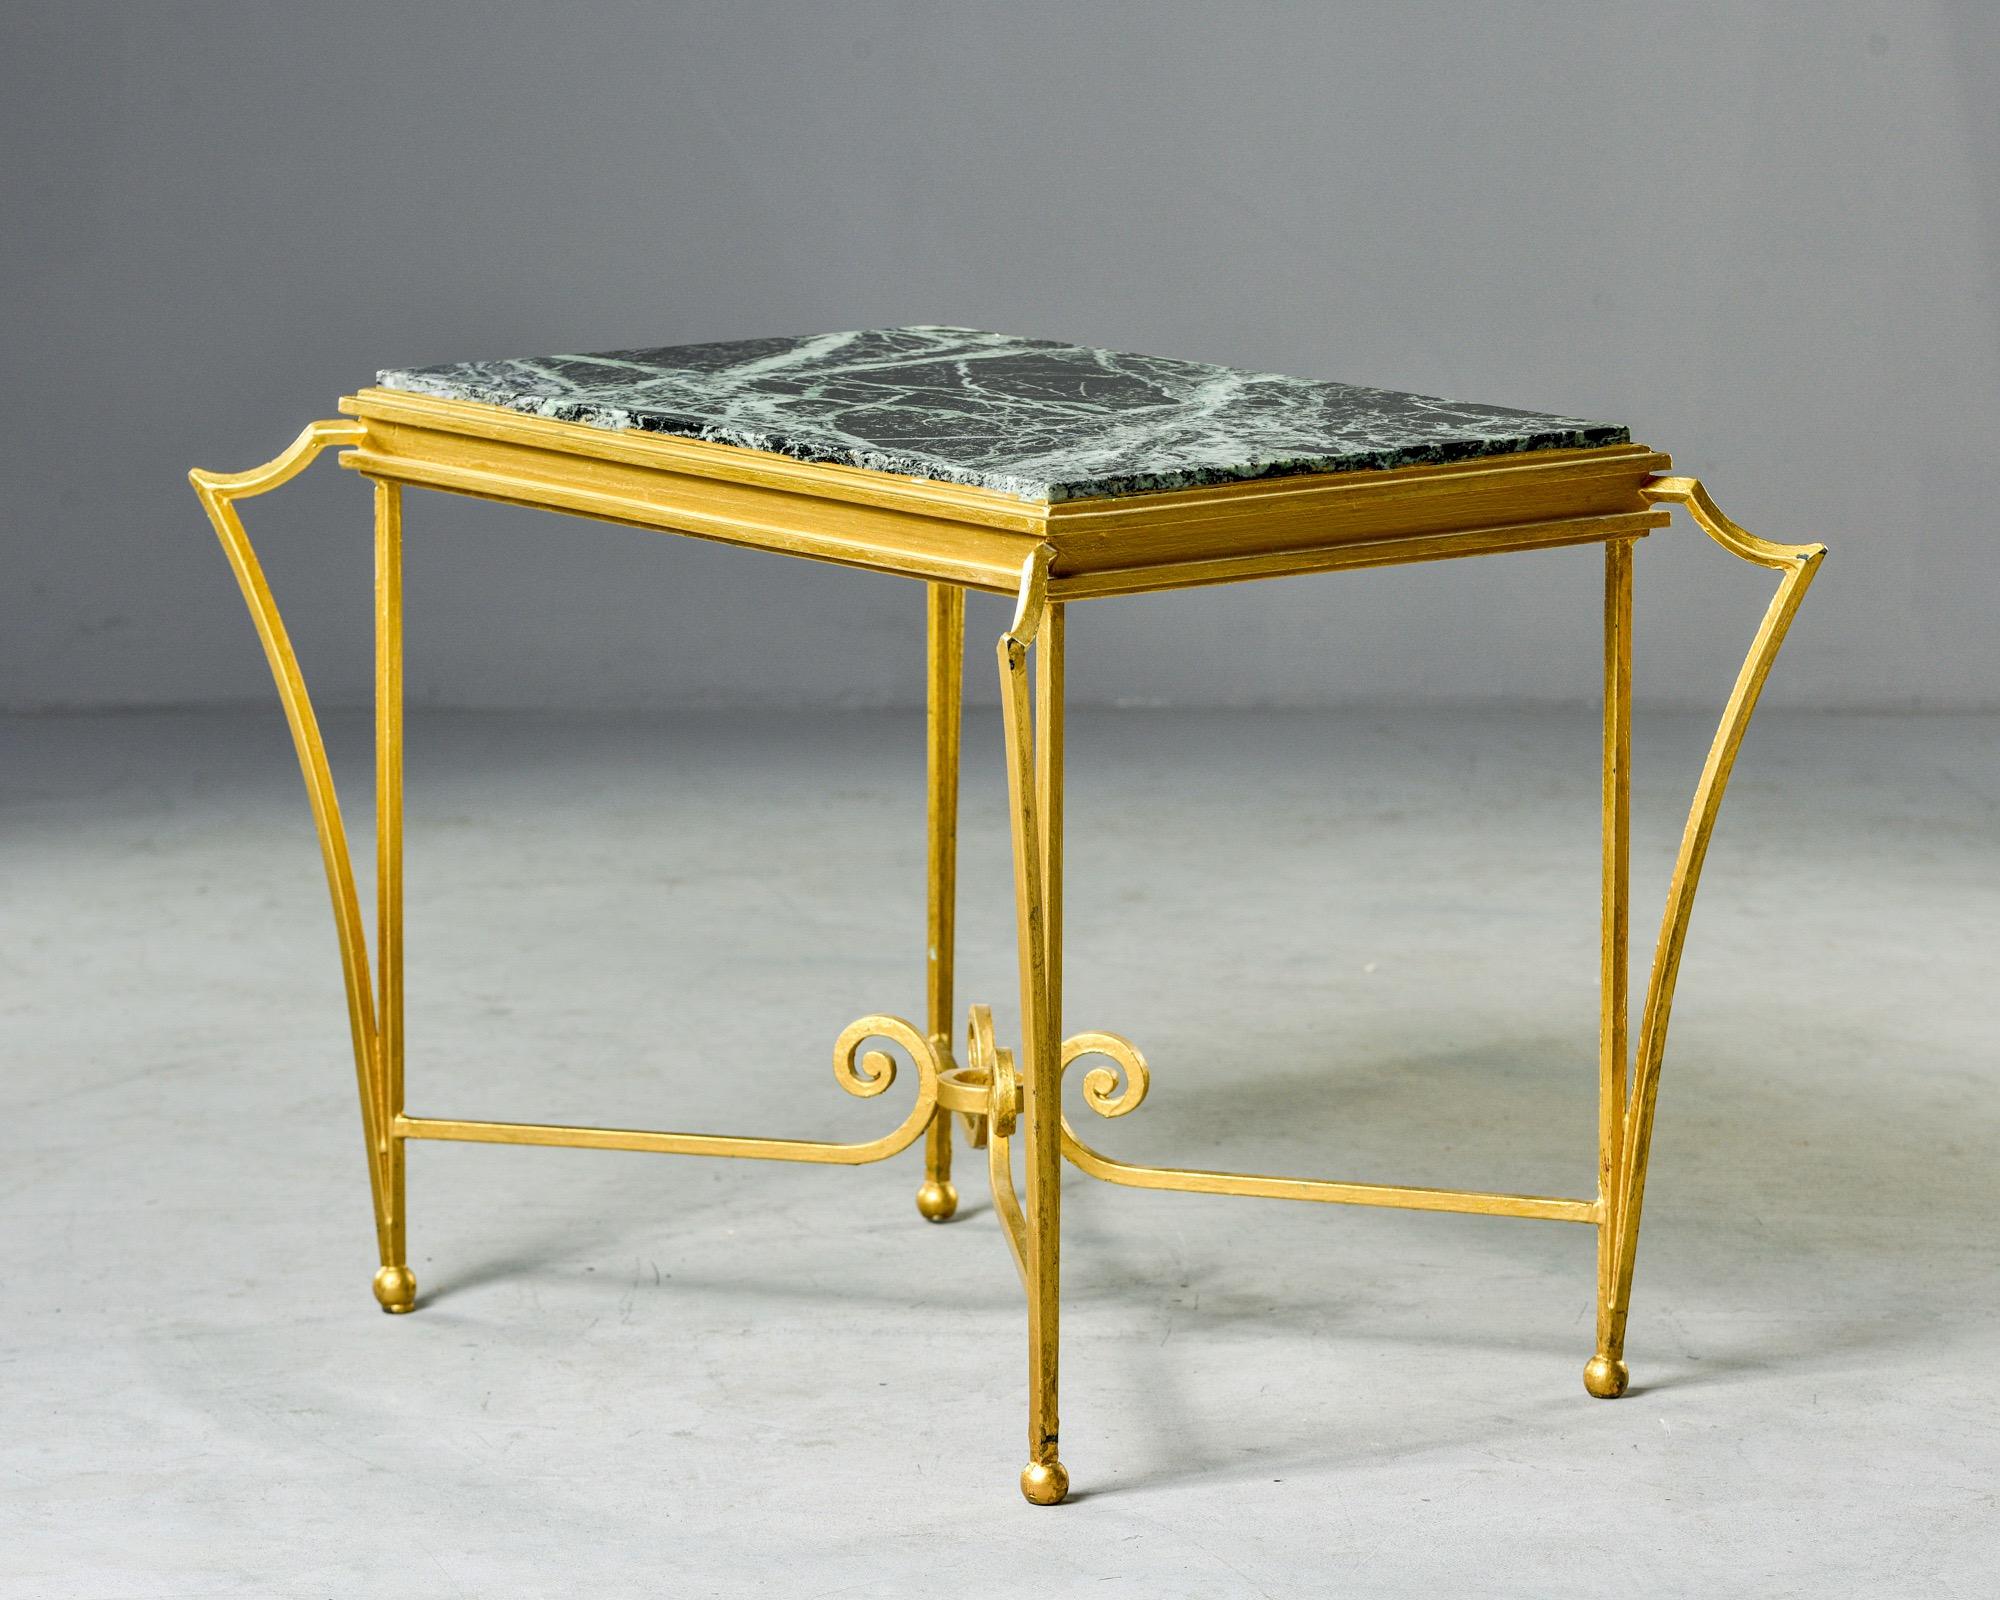 20th Century French Midcentury Side Table with Green Marble Top and Gilded Iron Frame